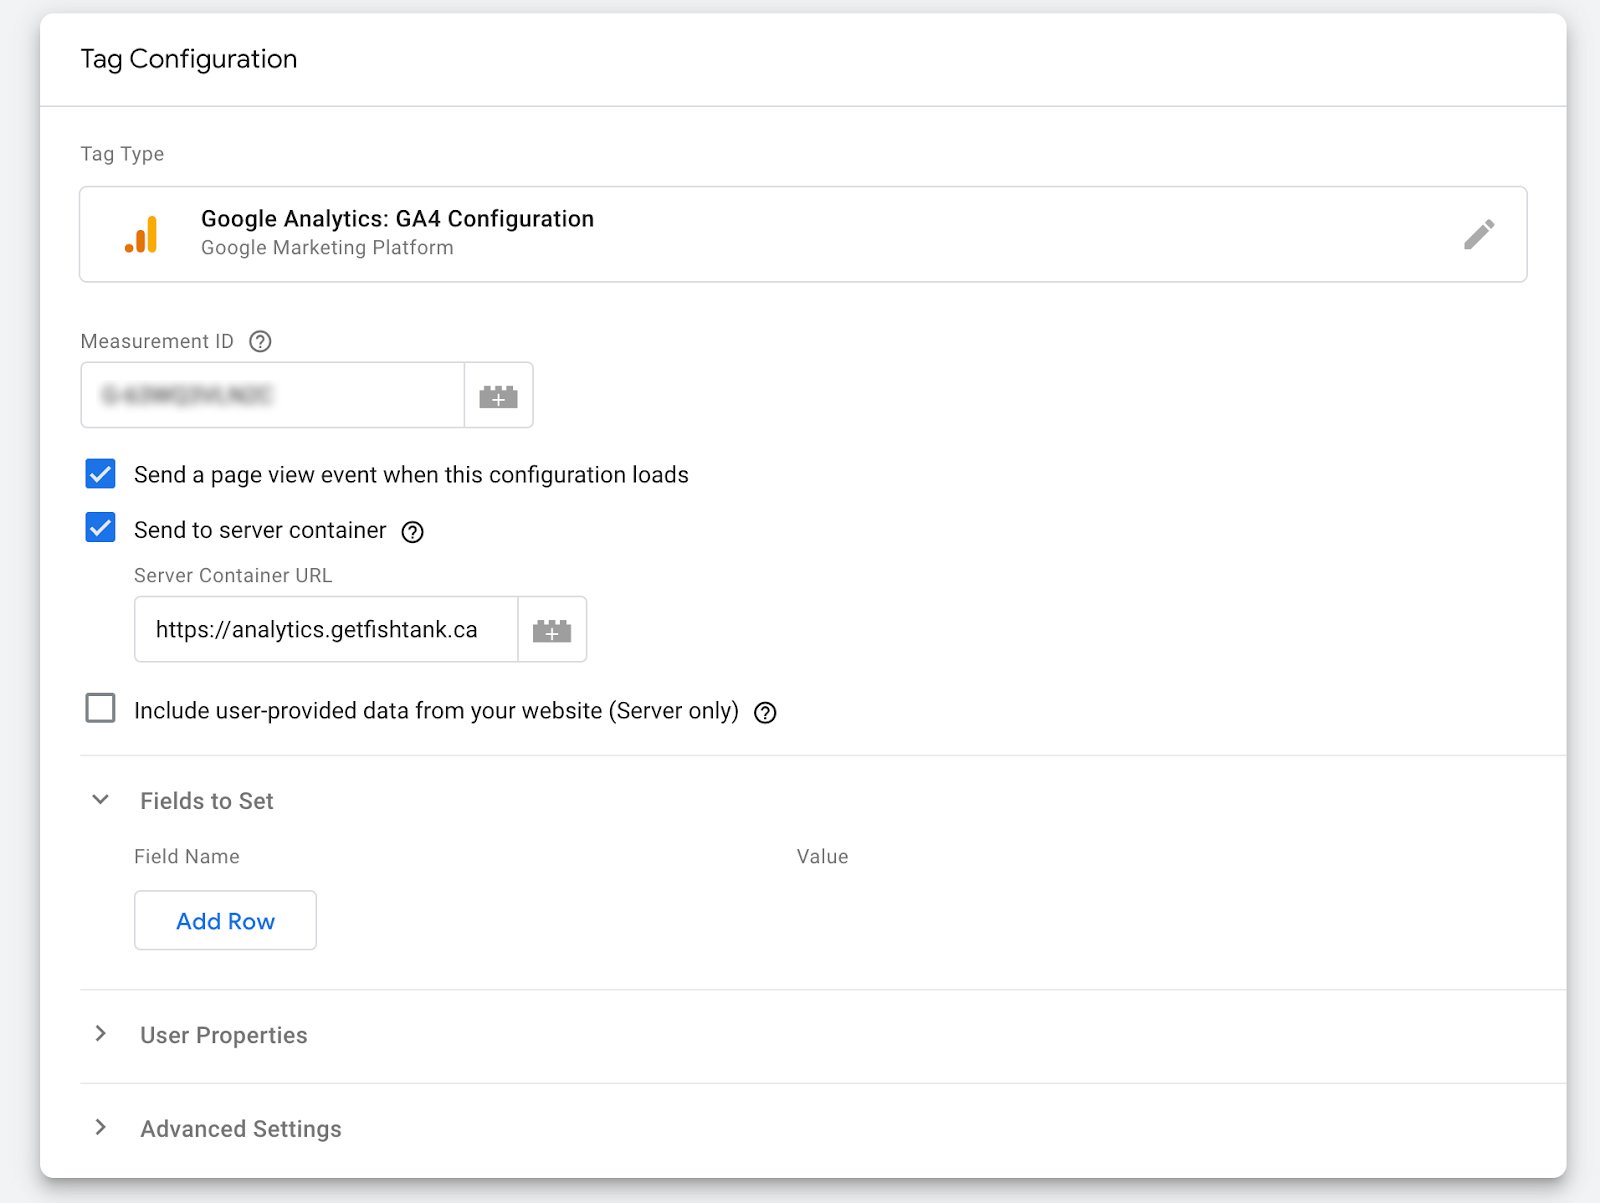 Screenshot of server-side tagging in Google Tag Manager tag configuration